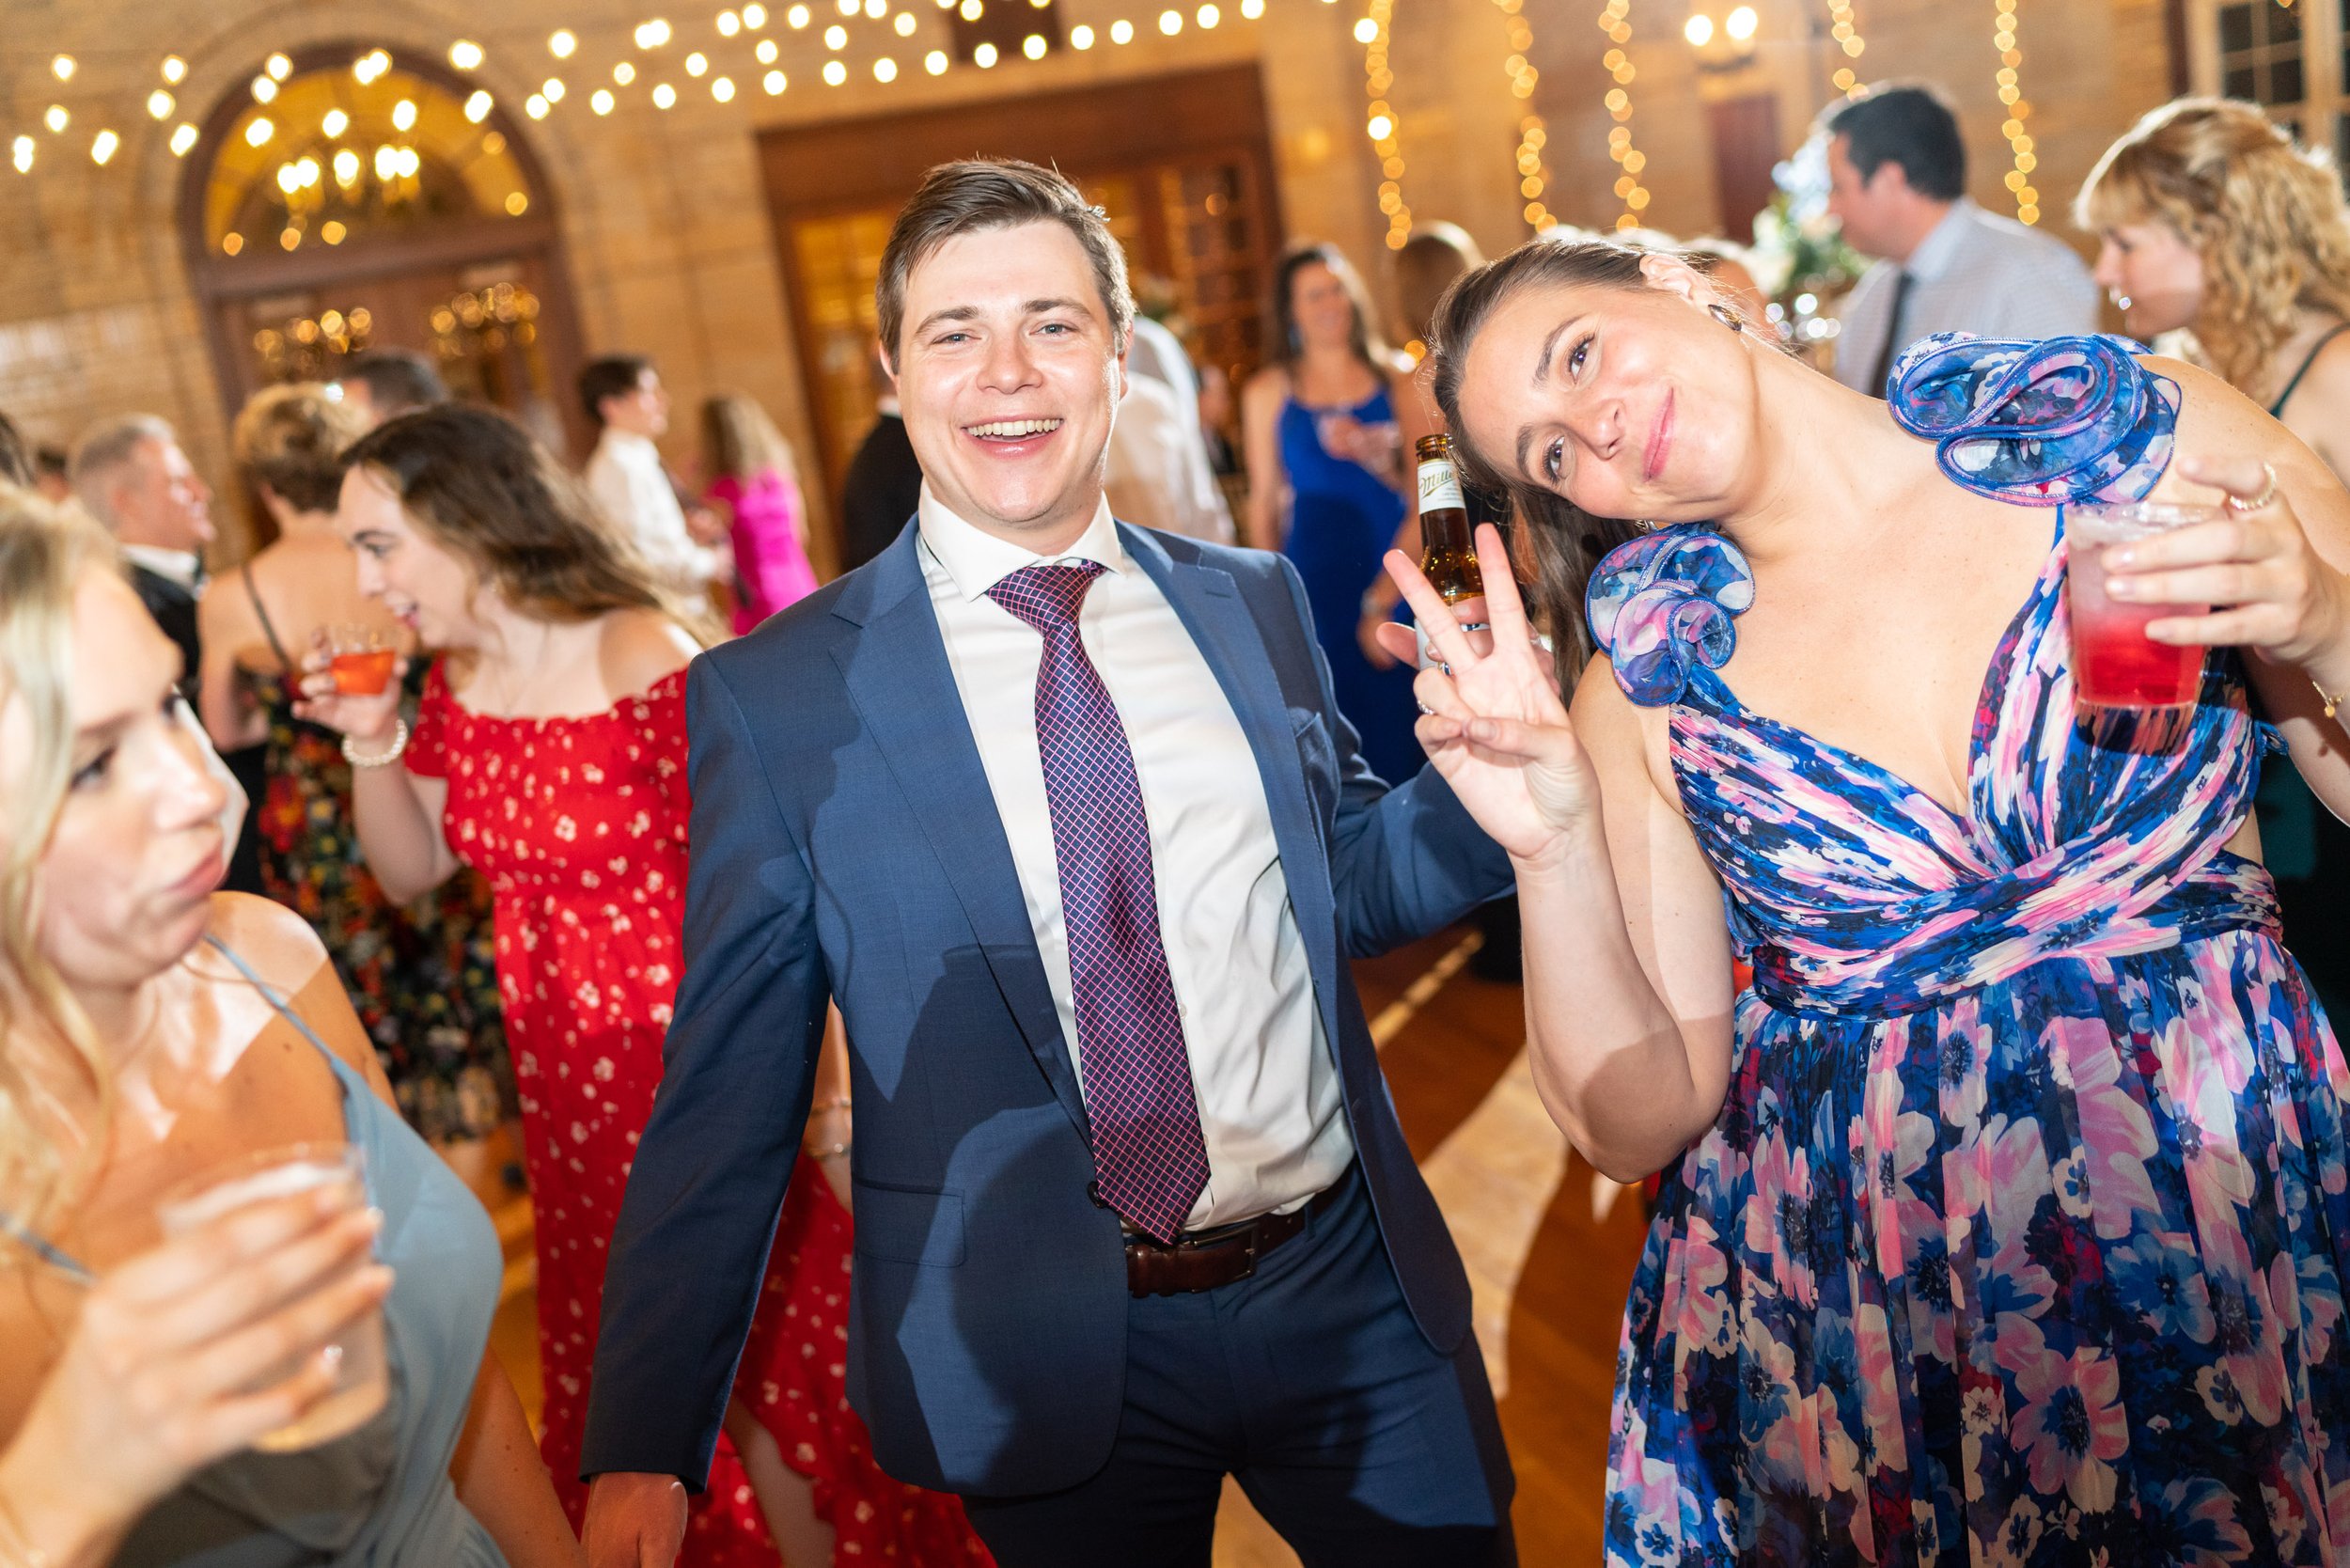 fun colorful candid wedding guest photography at st Francis hall in Washington DC